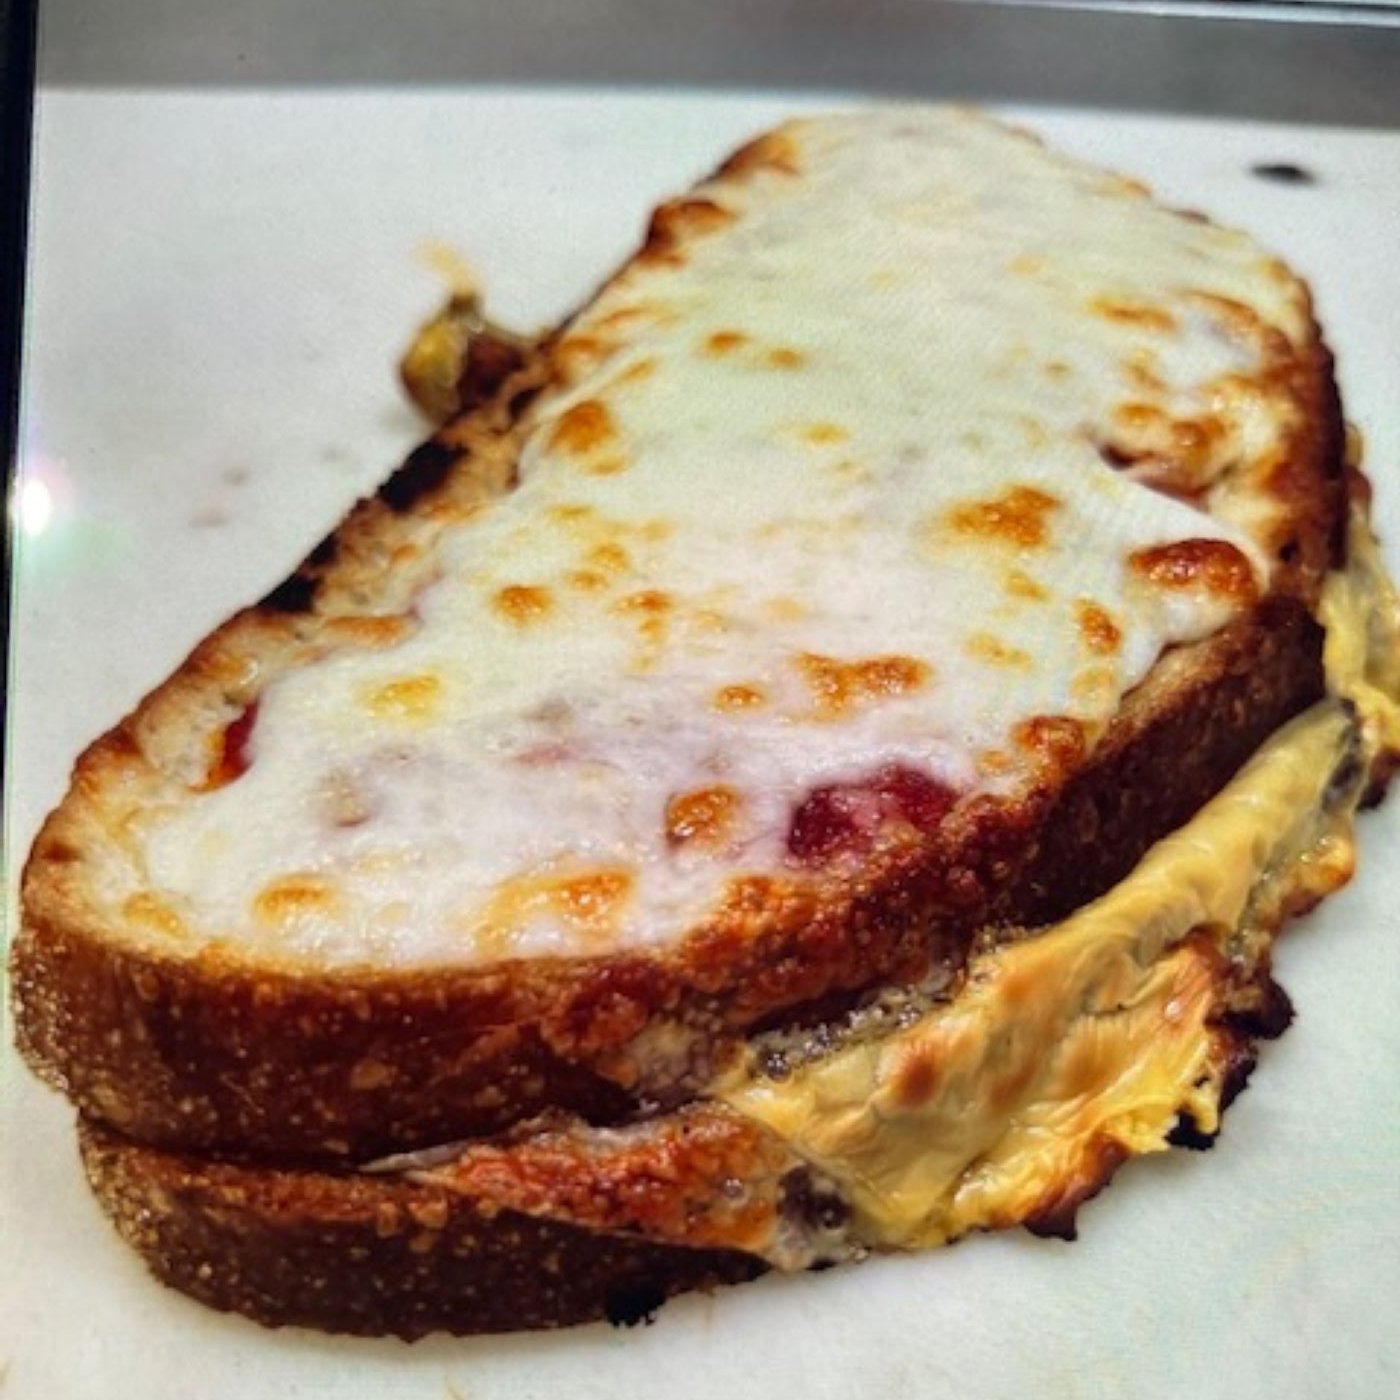 Grilled Cheese Pizza Sandwich